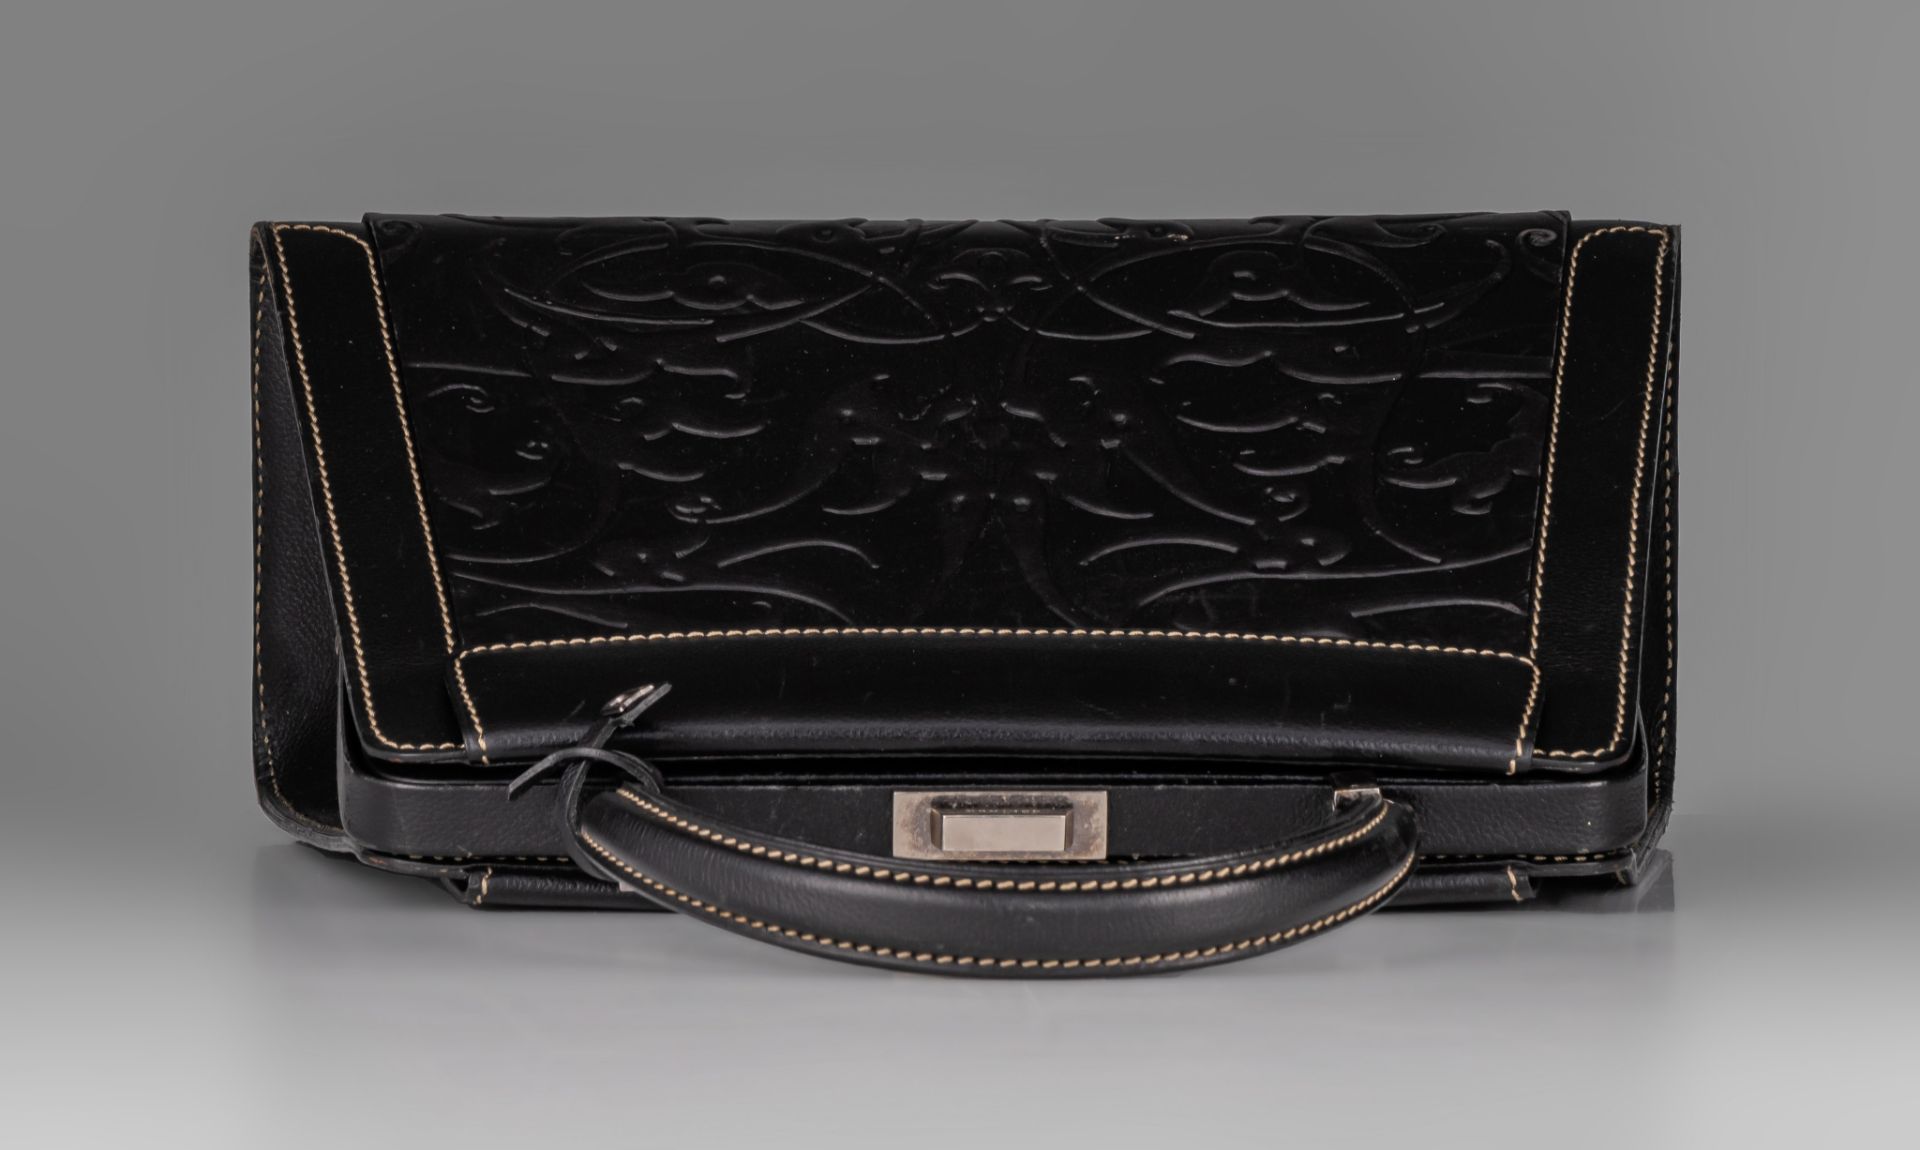 A Delvaux 'Jumping Illusion' handbag in black leather, with adjustable covers - Image 9 of 15